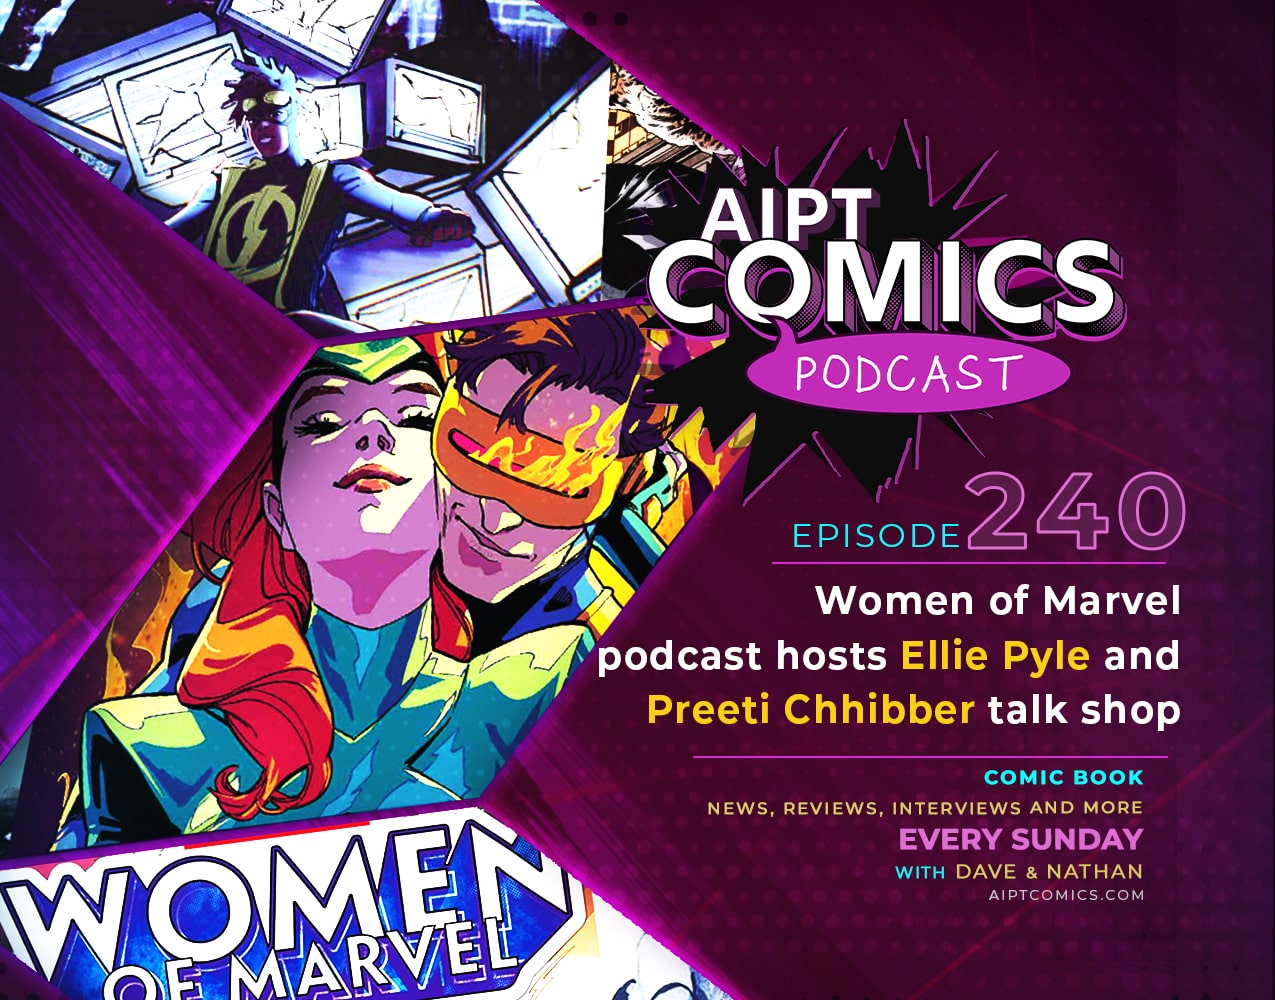 AIPT Comics Podcast Episode 240: Talking Jean Grey and podcasting with Women of Marvel podcast hosts Ellie Pyle and Preeti Chhibber